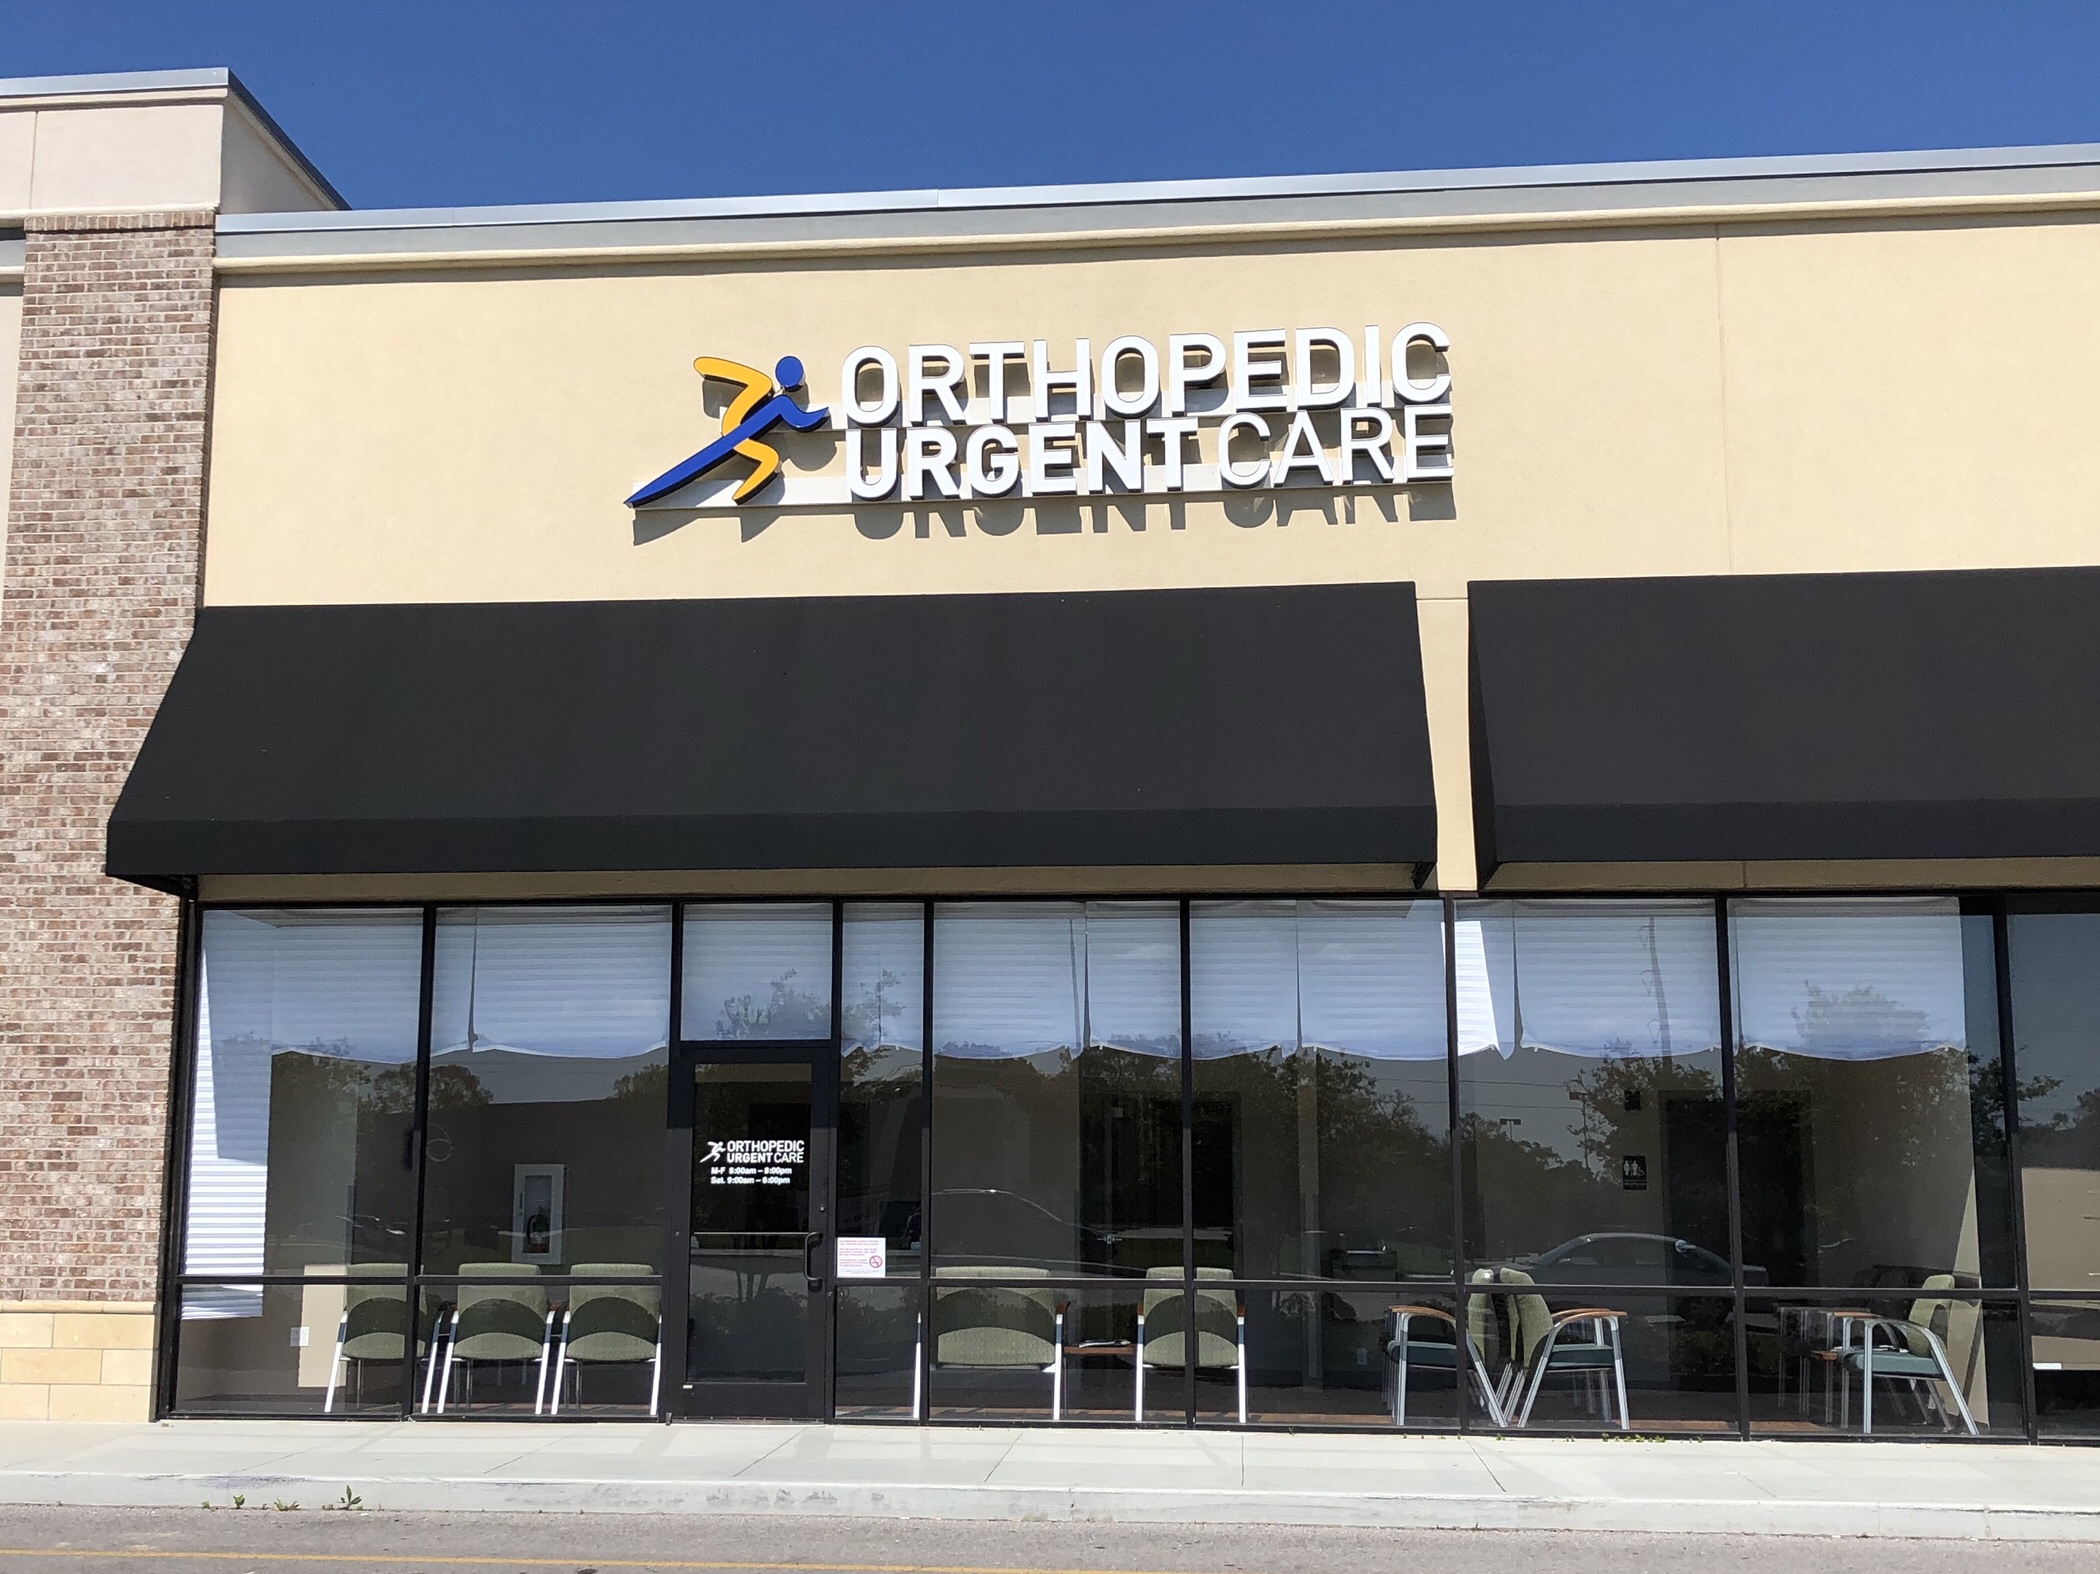 Orthopedic Urgent Care Near Whole Foods Now Open ...